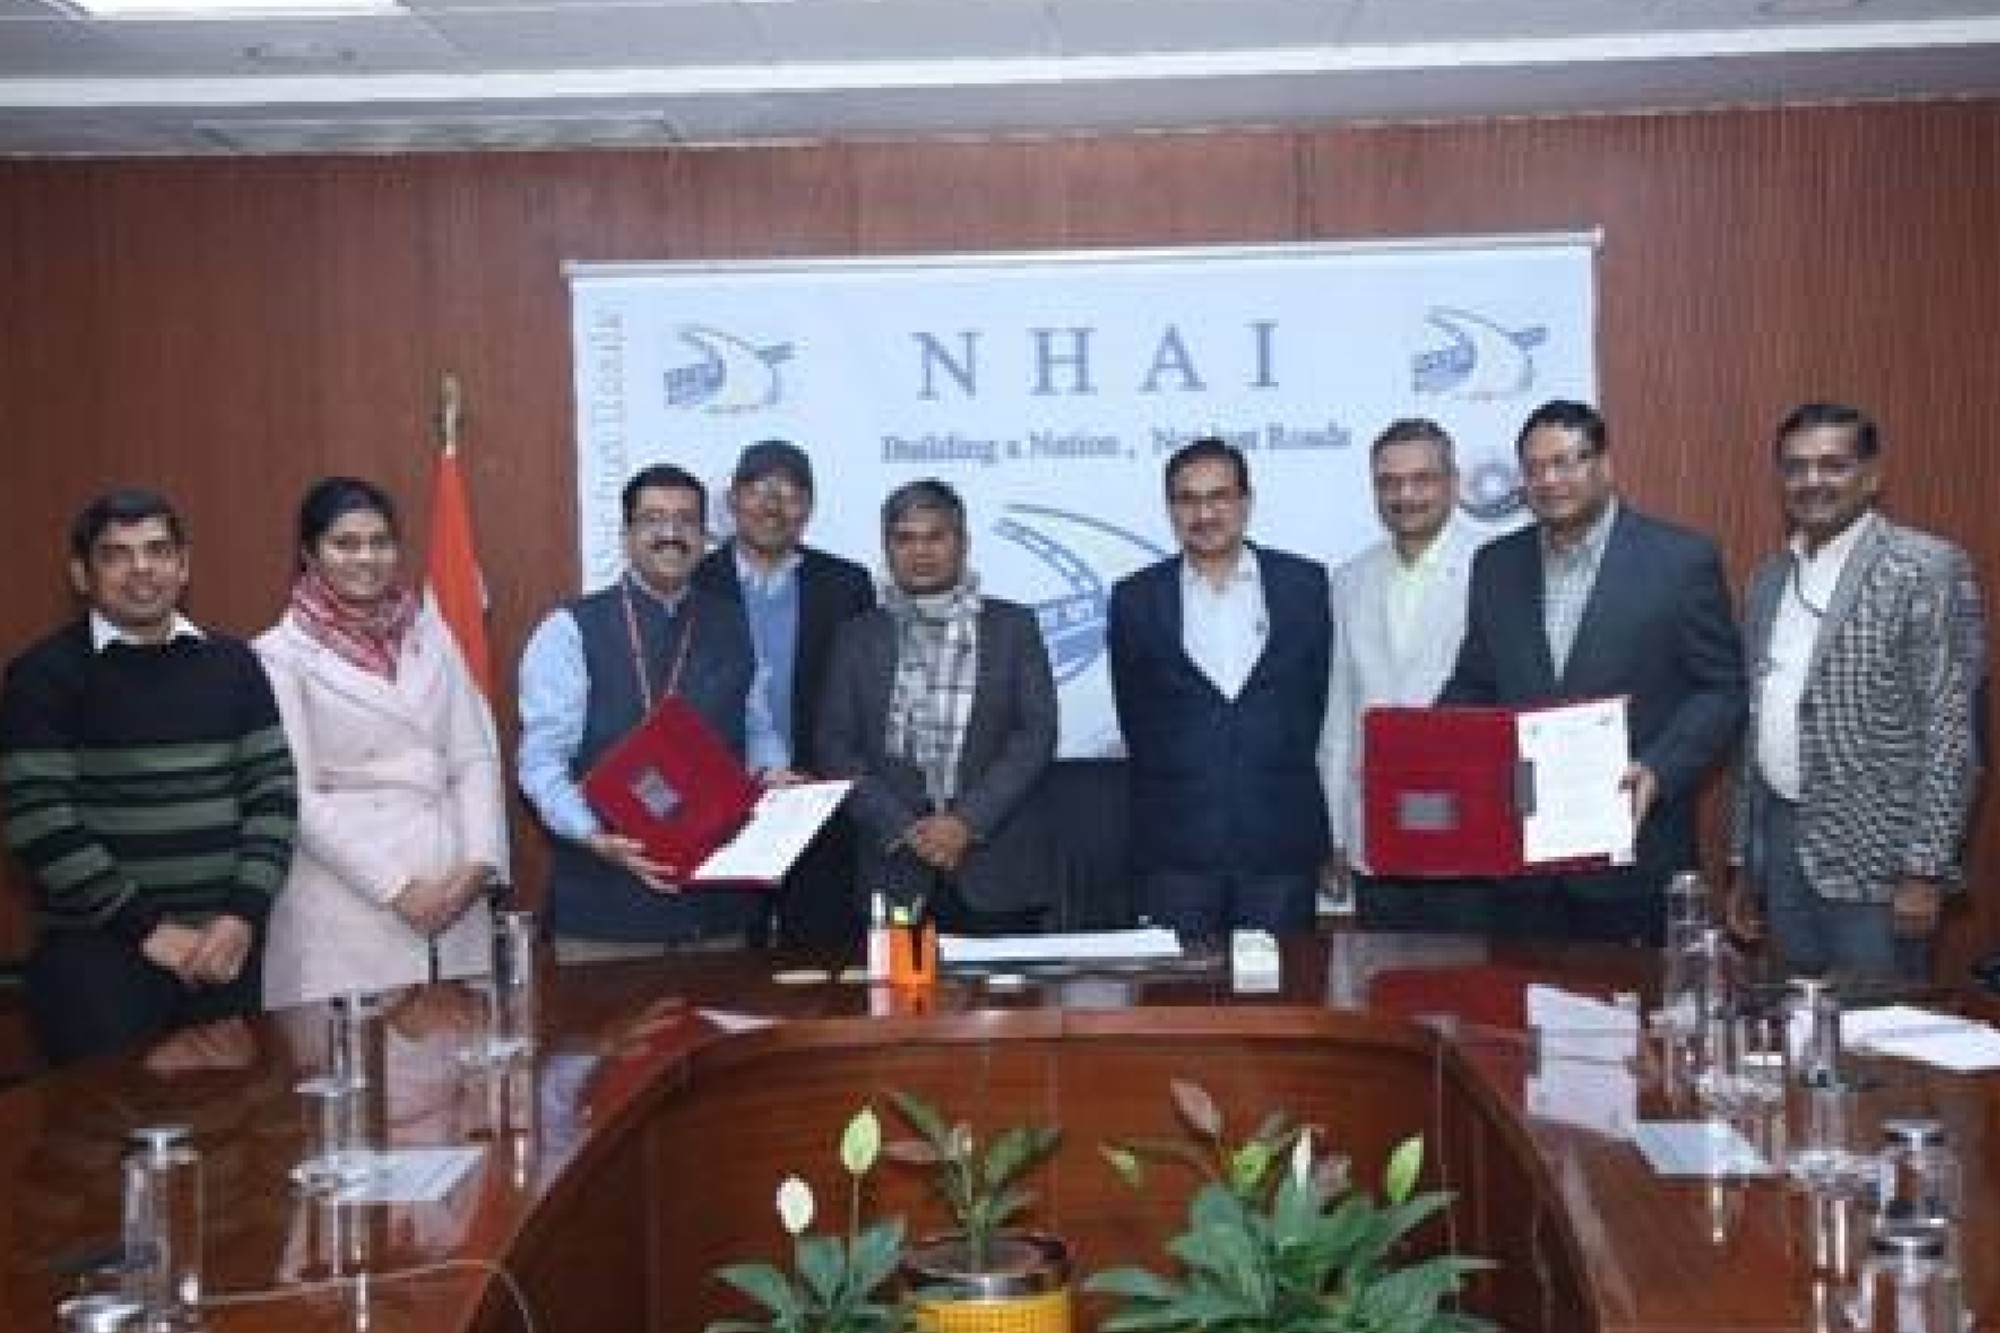 The National Highways Authority of India (NHAI) has embarked on a strategic partnership with the Geological Survey of India (GSI) to fortify the development of a robust National Highways network.